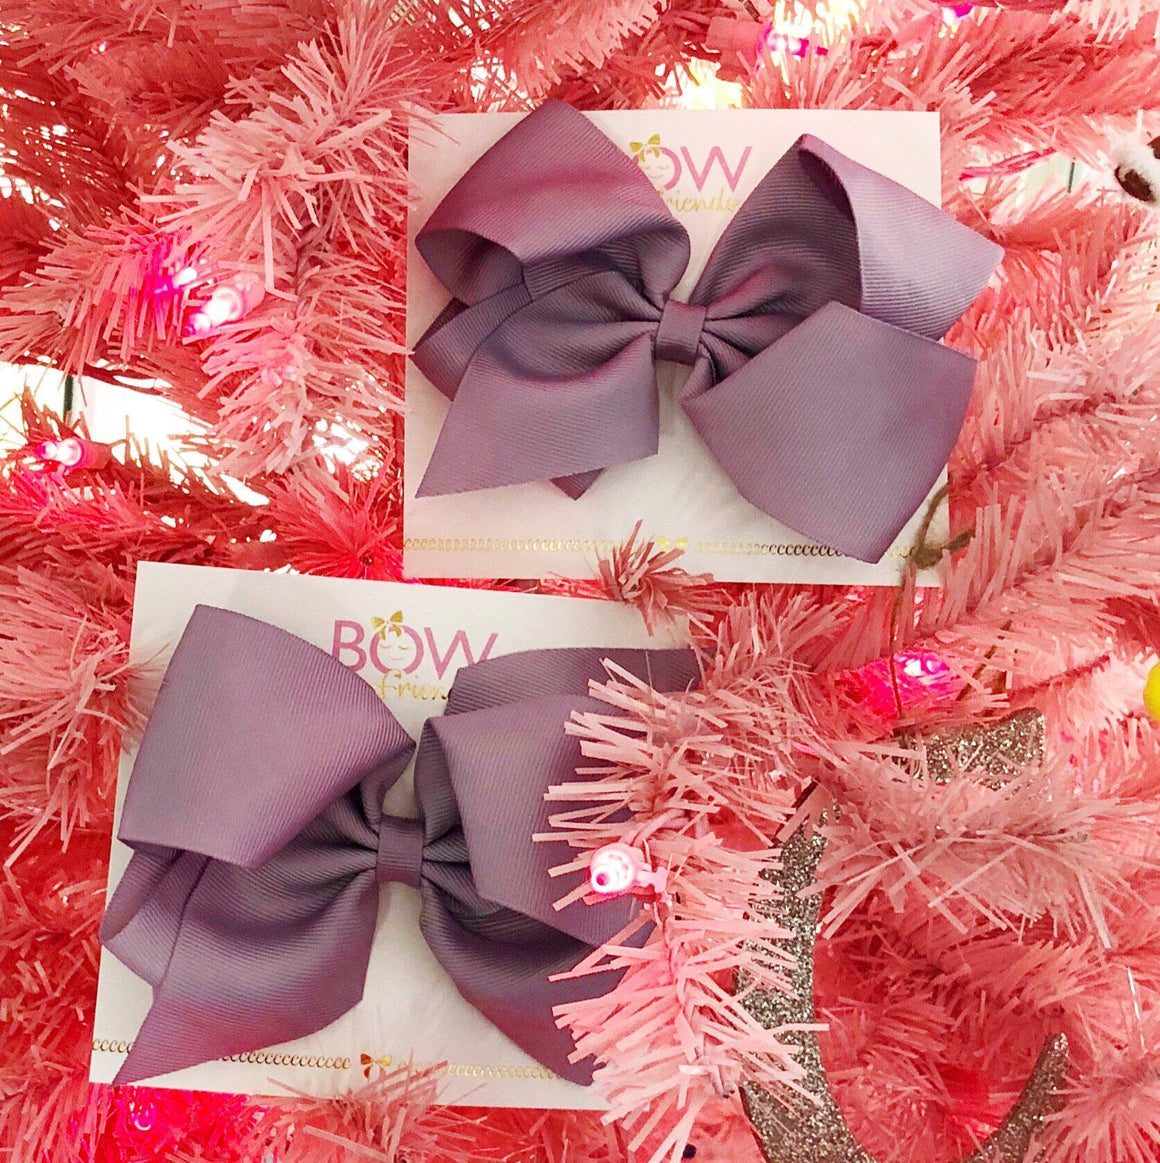 BOW FRIENDS - HAIR BOWS LARGE, ACCESSORIES, We love you Connie - Bon + Co. Party Studio